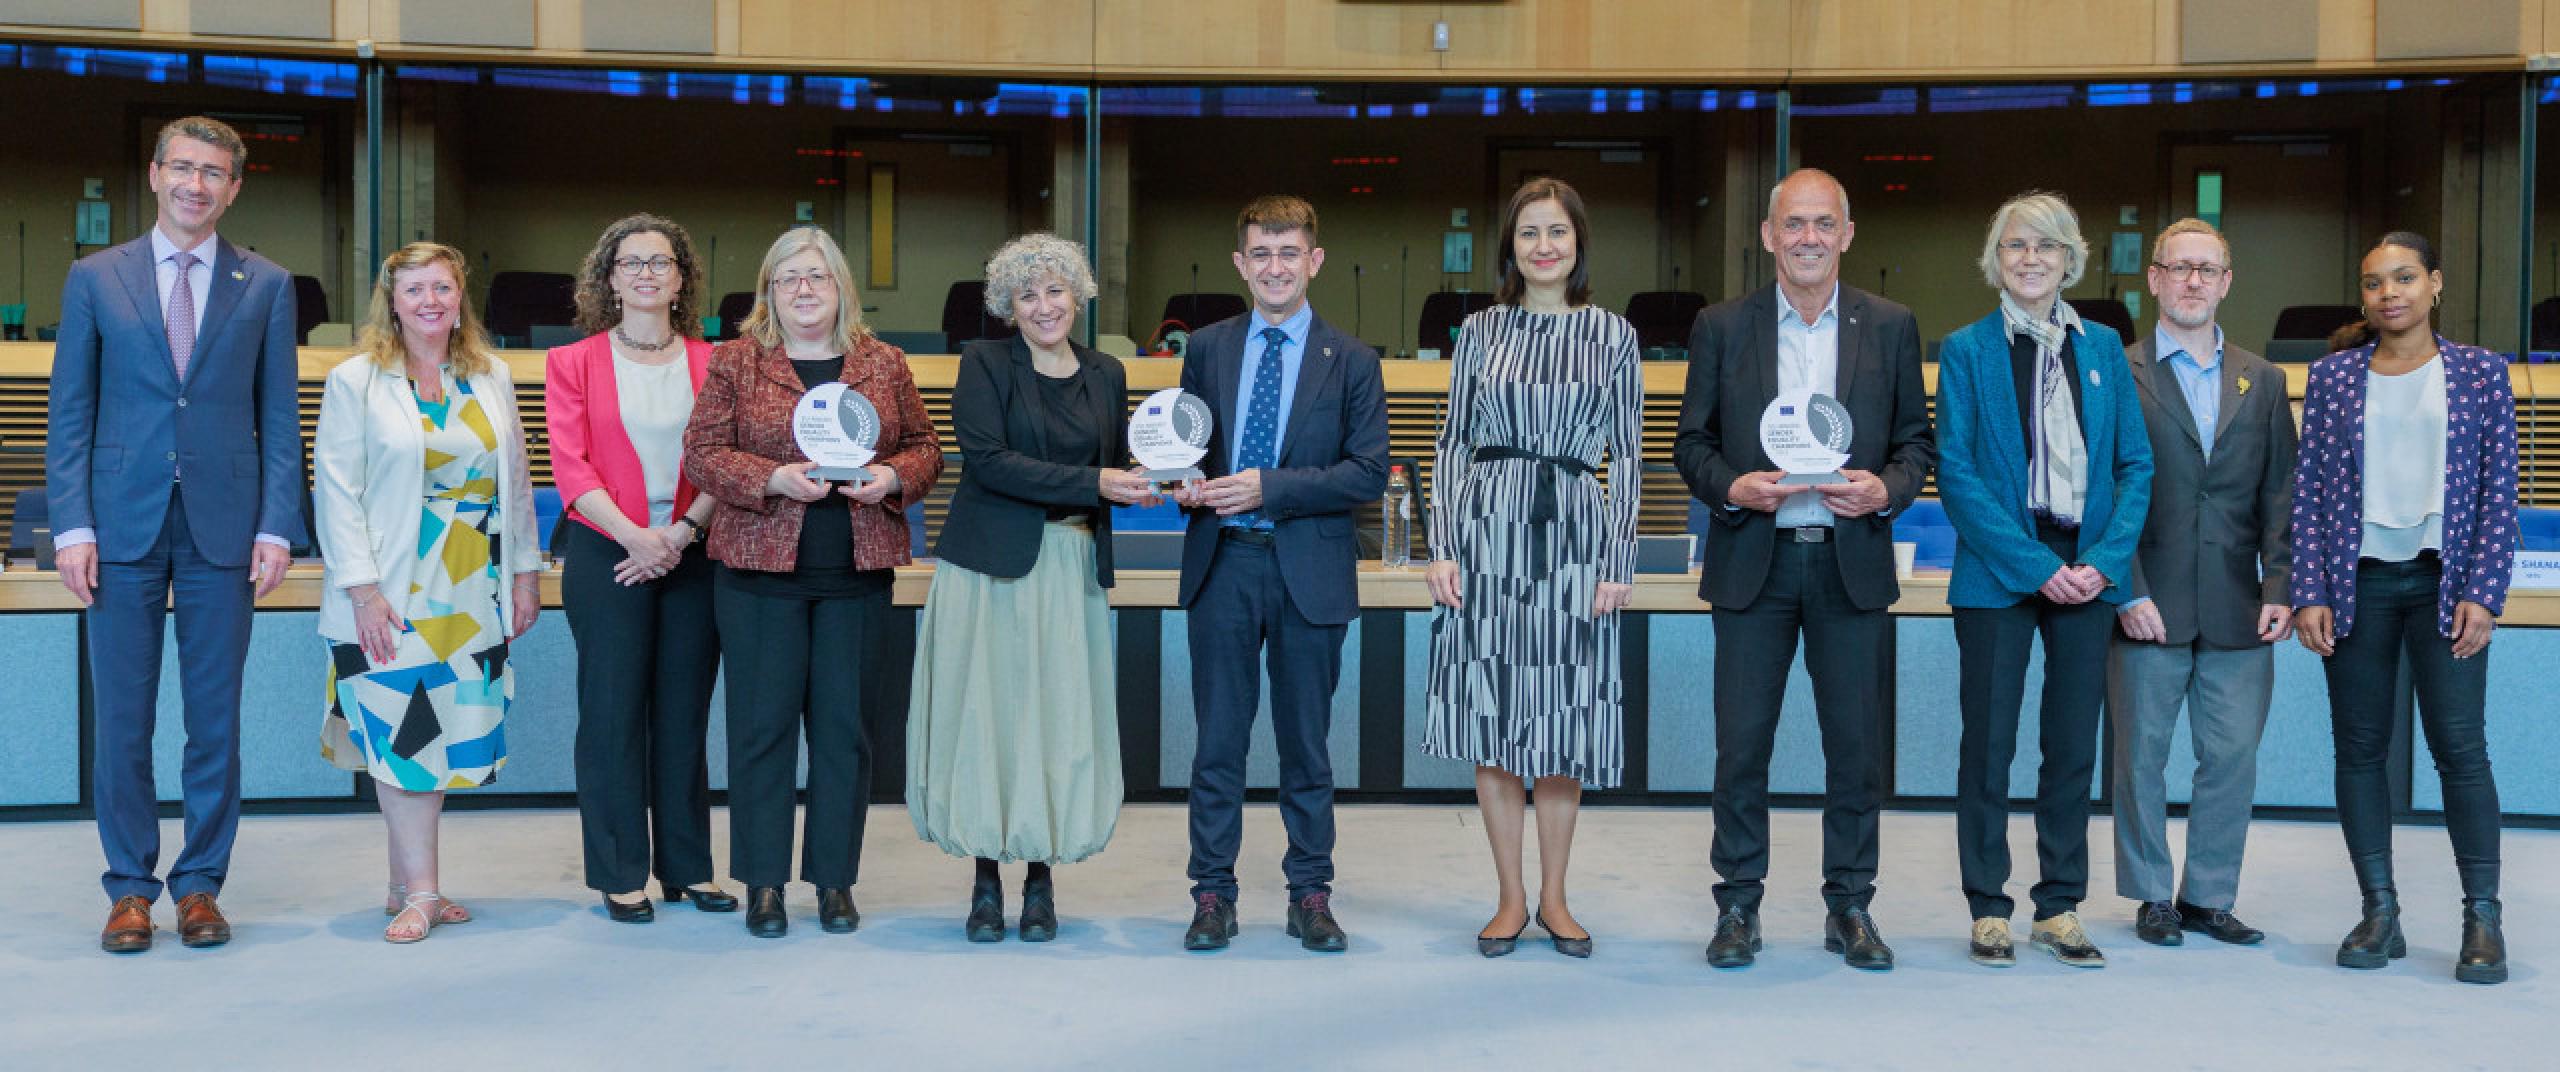 Winners announced: EU Gender Equality Champions in research and innovation